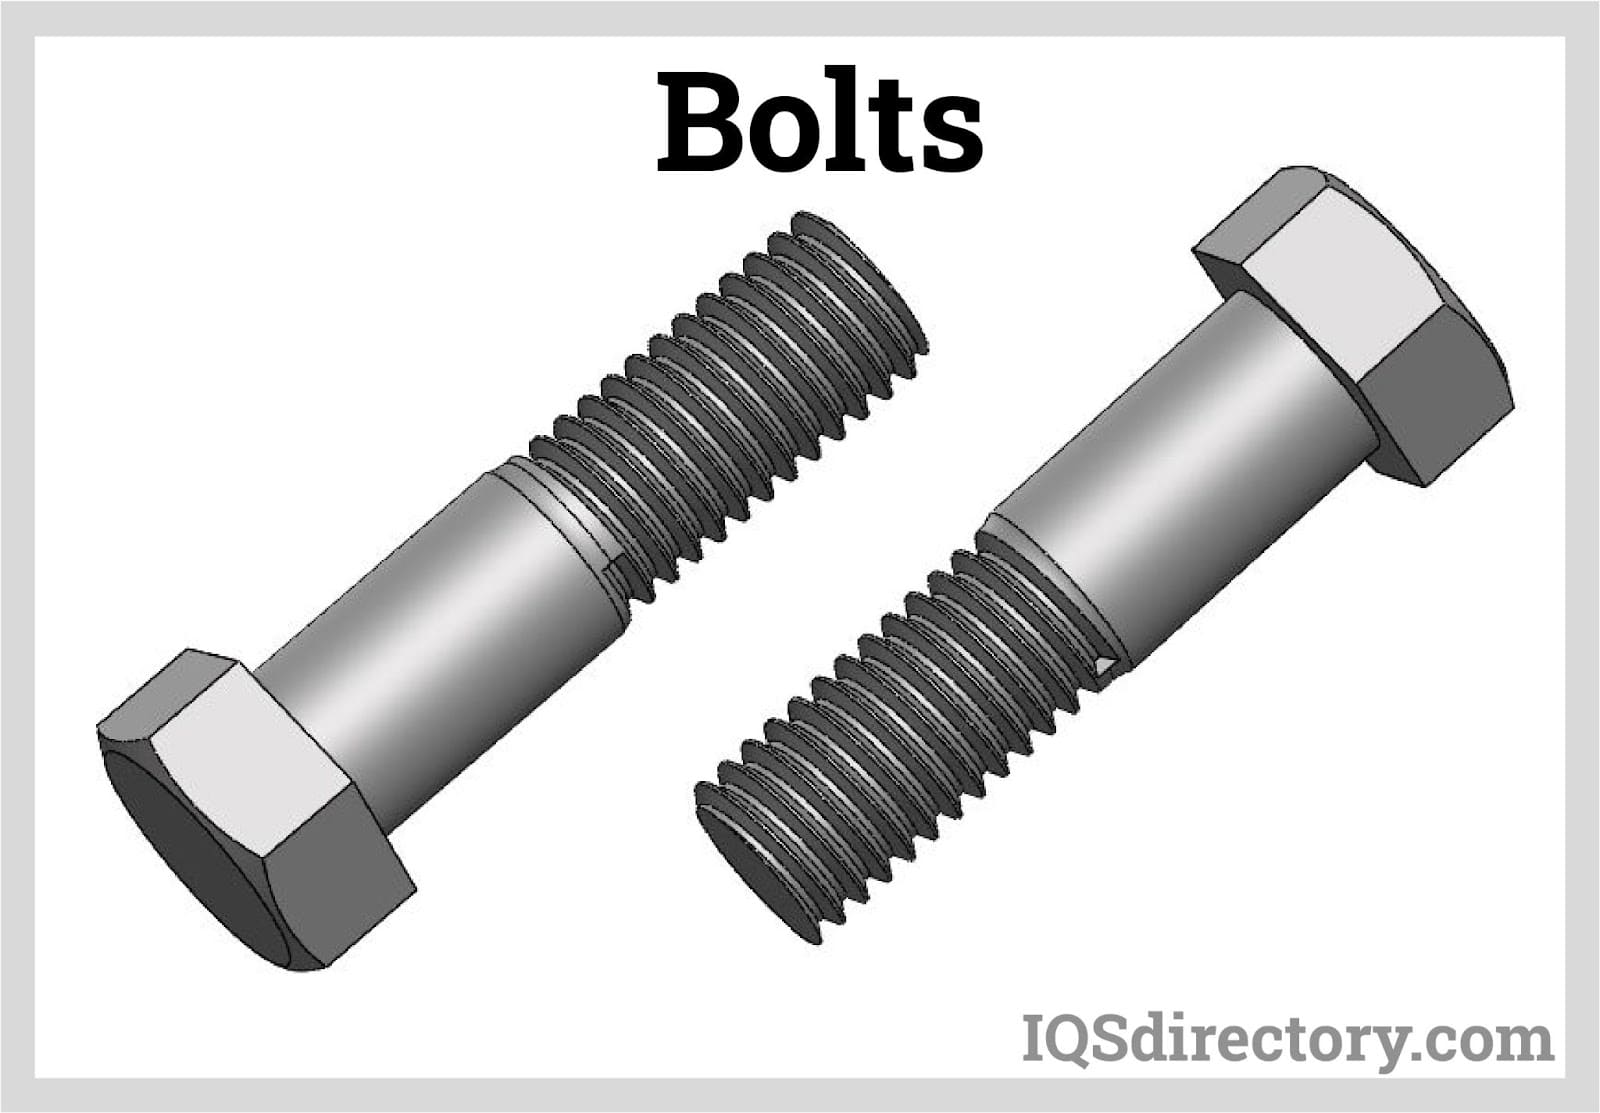 O que significa THE NUTS AND BOLTS